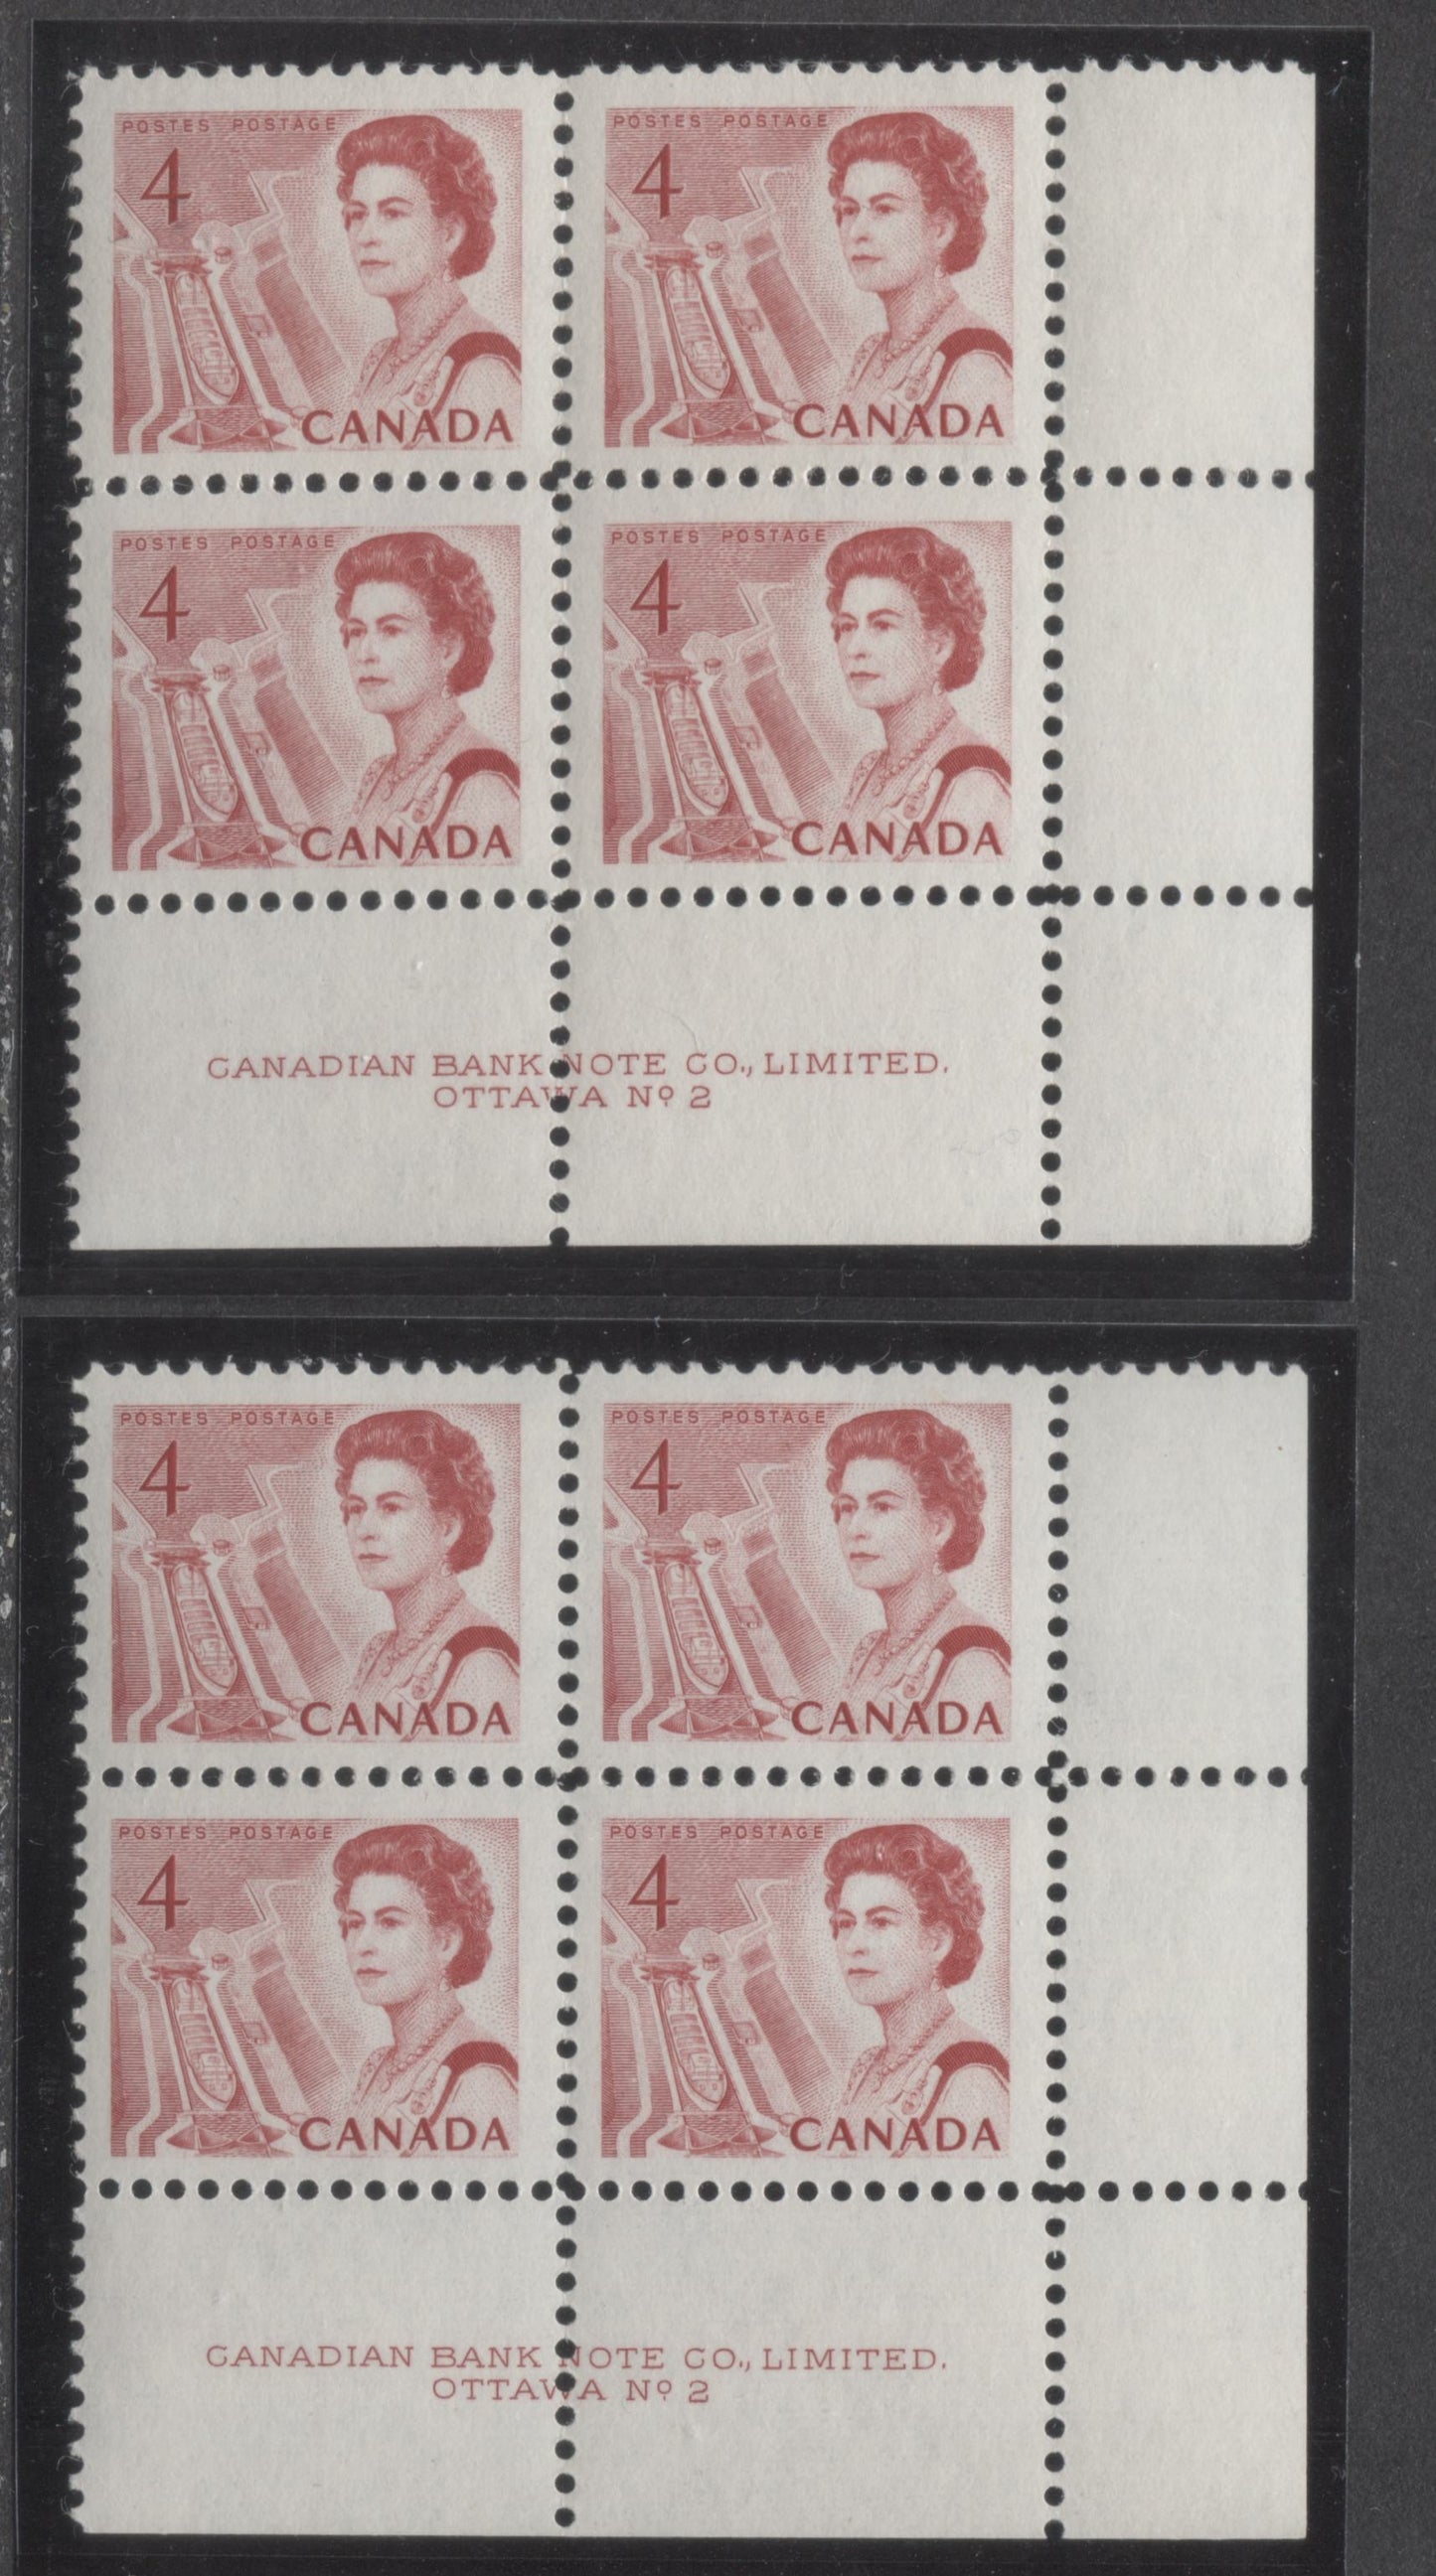 Lot 73 Canada #457ii 4c Light & Carmine Rose Queen Elizabeth II, 1967-1973 Centennial Issue, 2 VFNH LR Plate 2 Blocks Of 4 On Off-White DF2 & LF3 Paper With Streaky Dex Gum, Red On Brown/Violet Gray Under UV